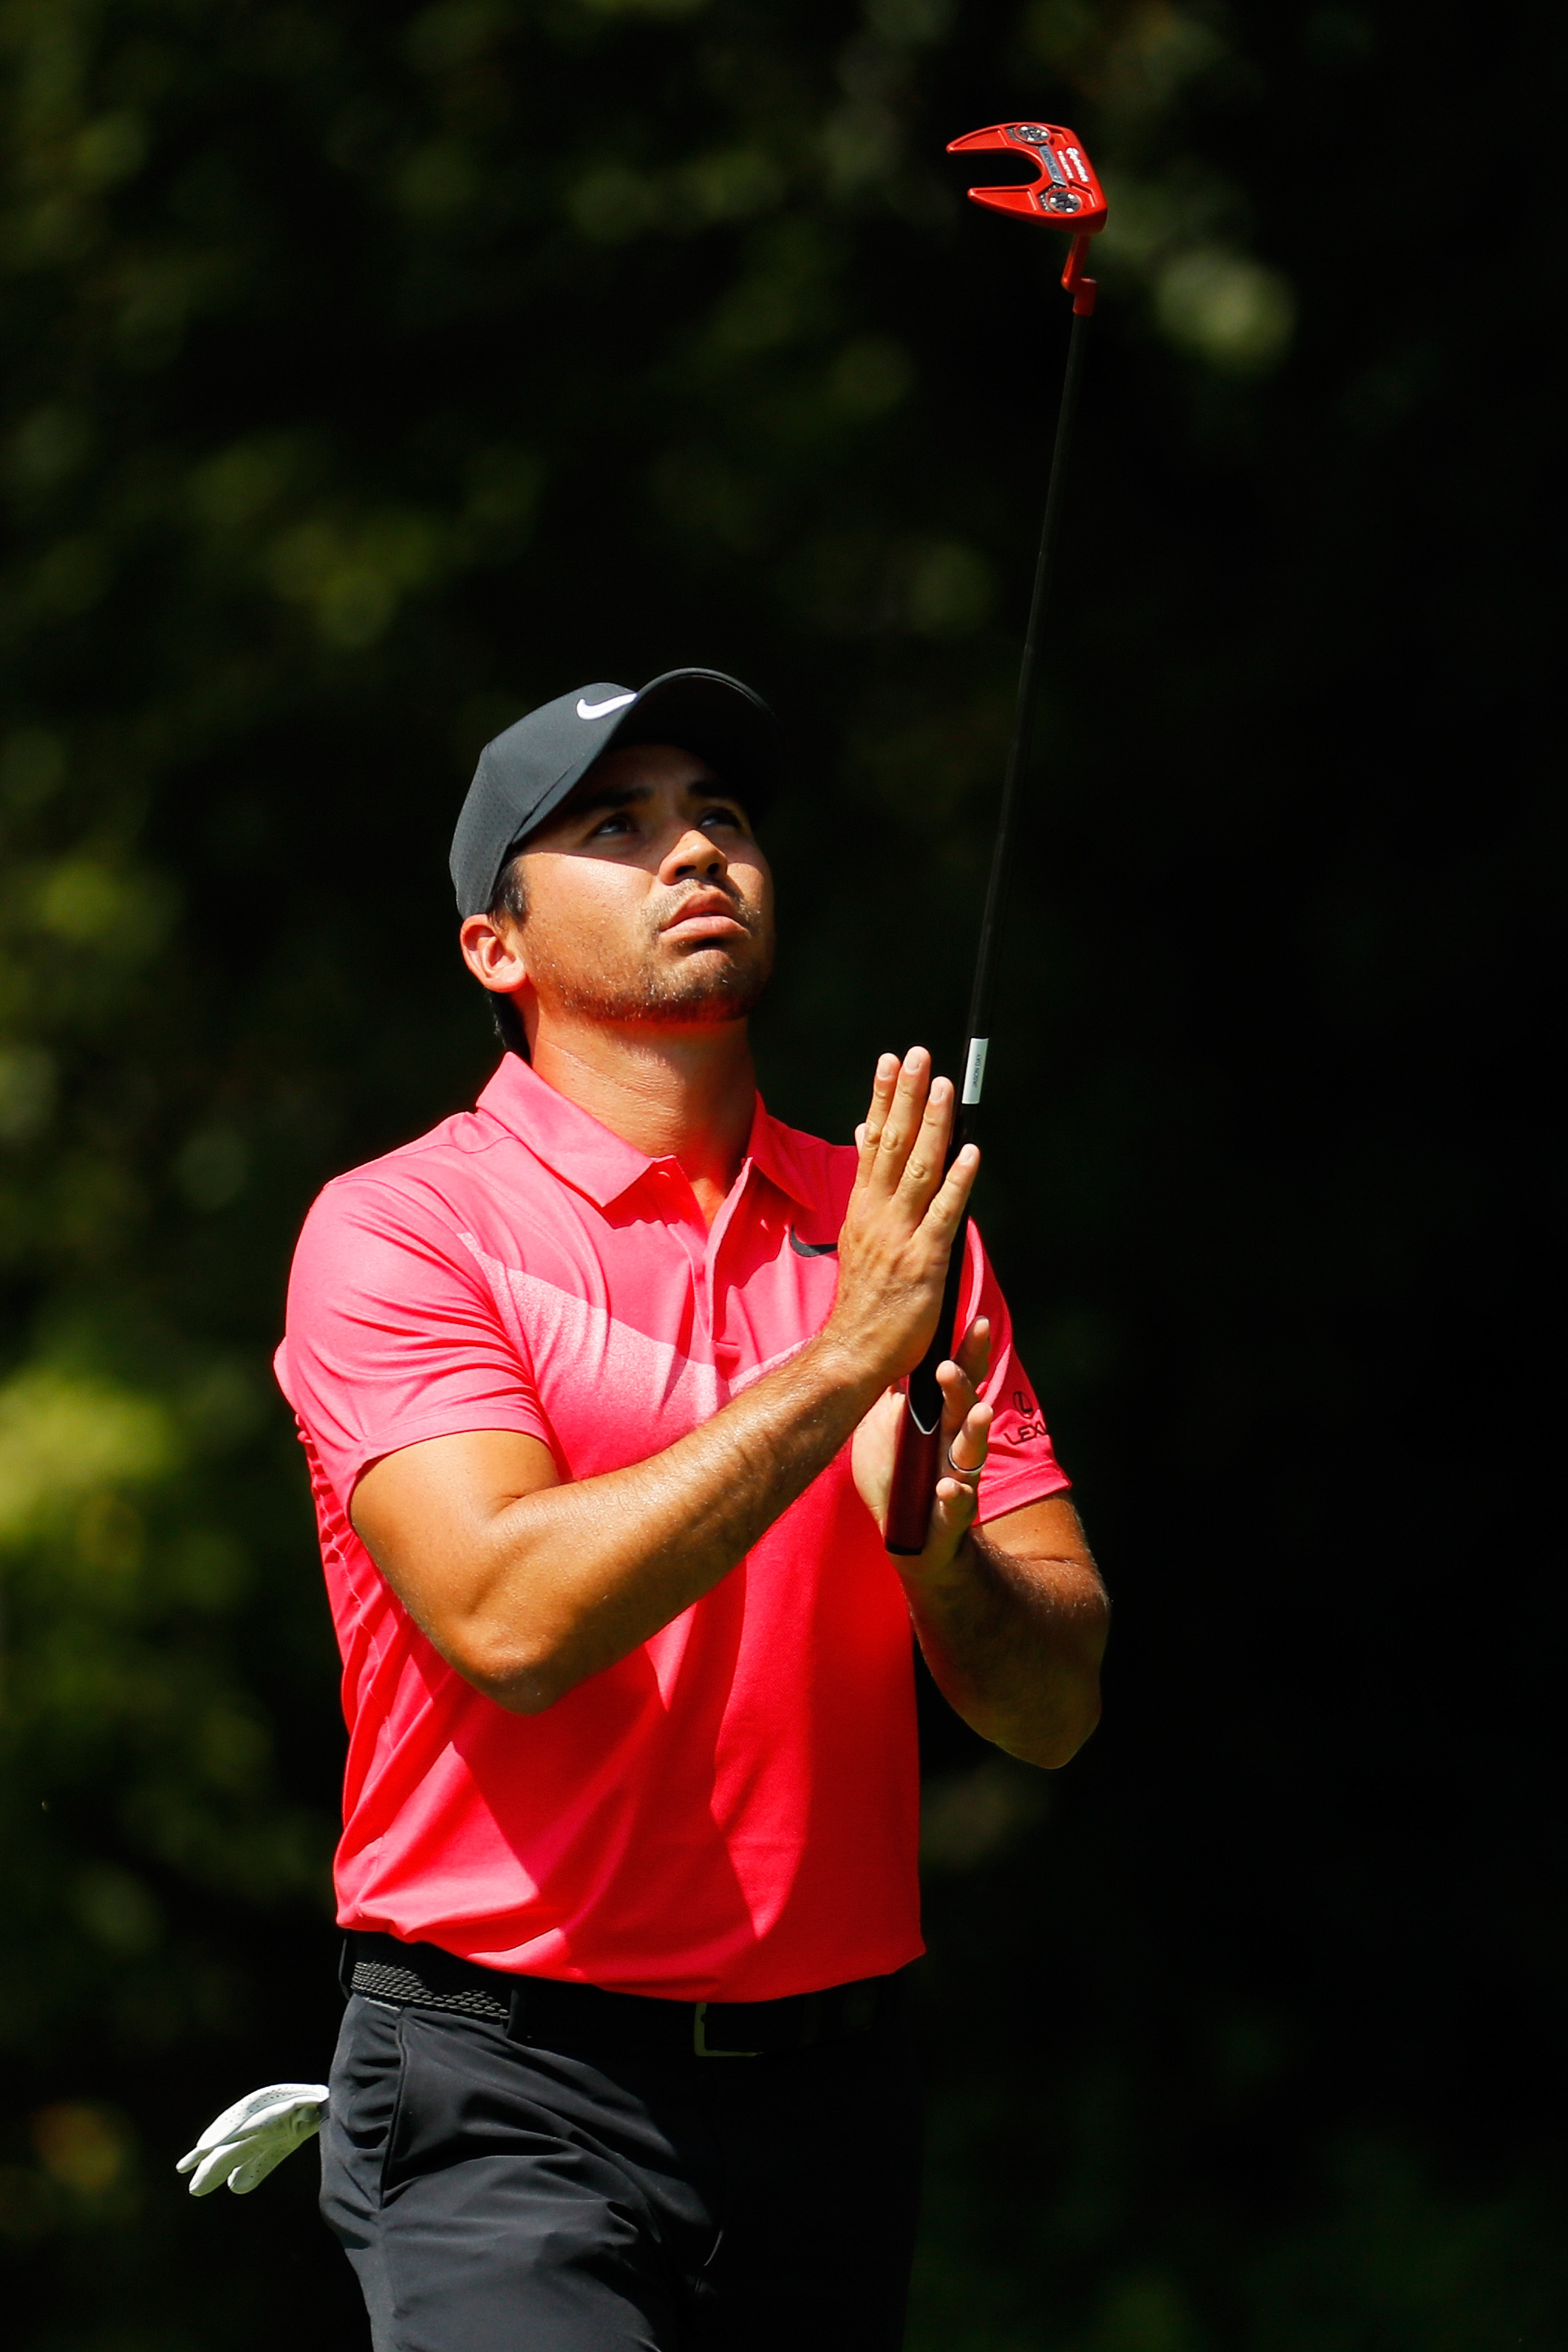 Jason Day puts new 2018 TaylorMade red putter in play